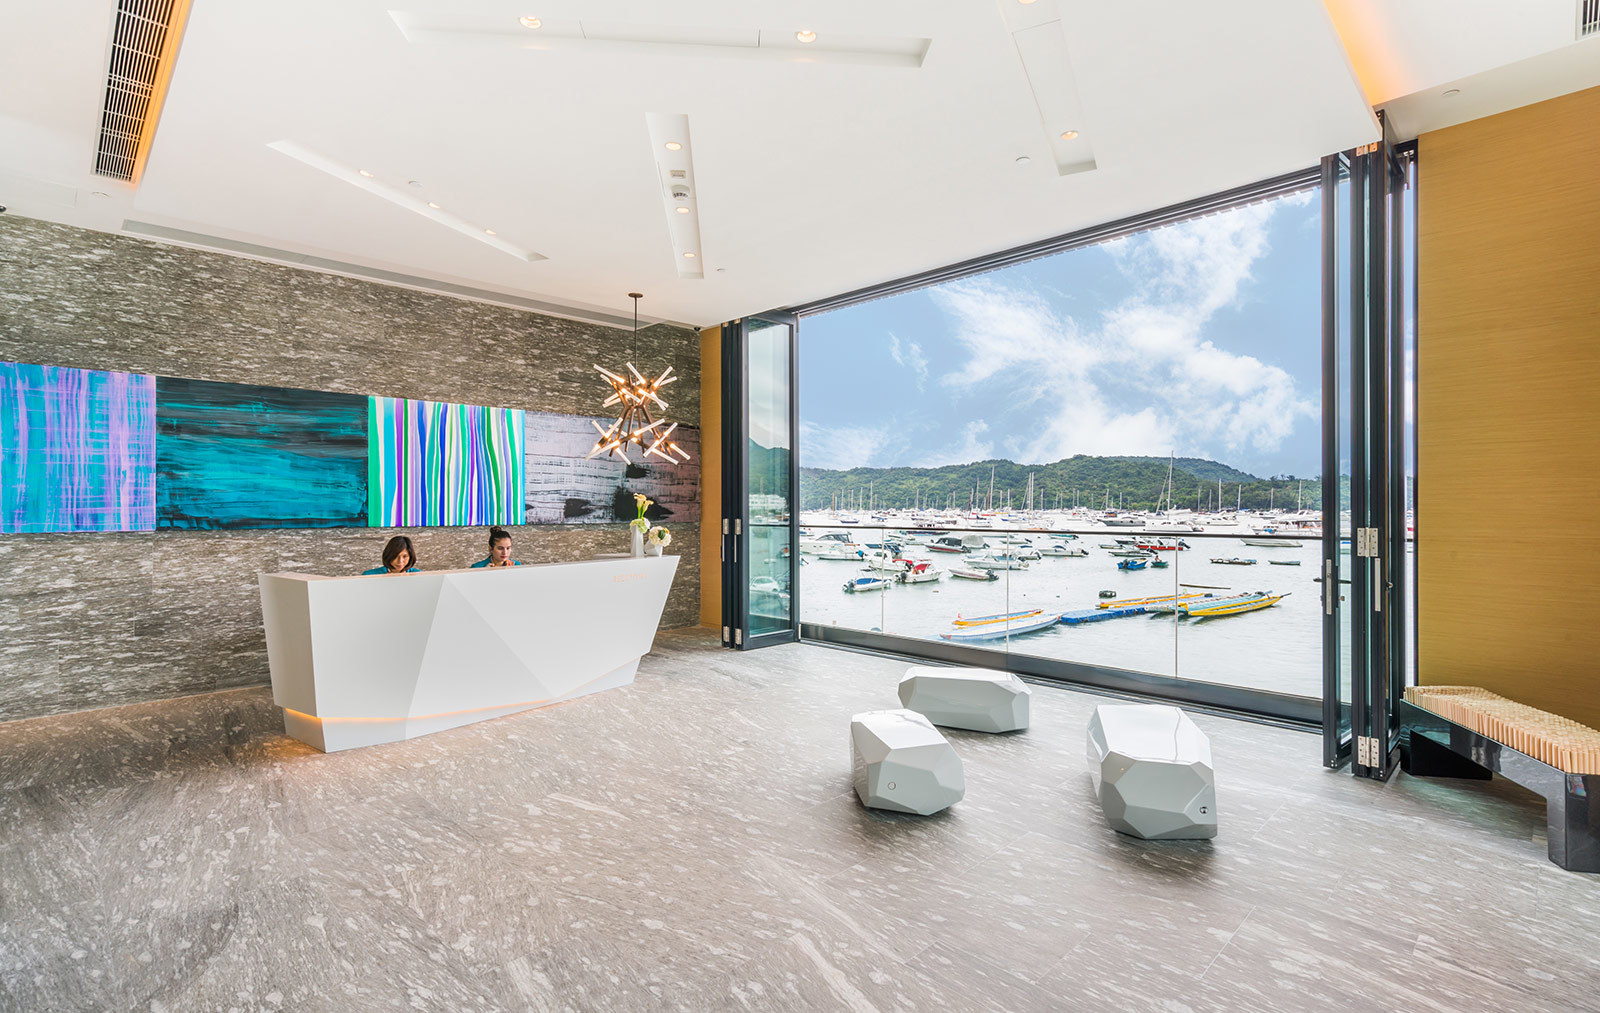 Lobby interior of The Pier Hotel with a view of the Sai Kung harbour in New Territories